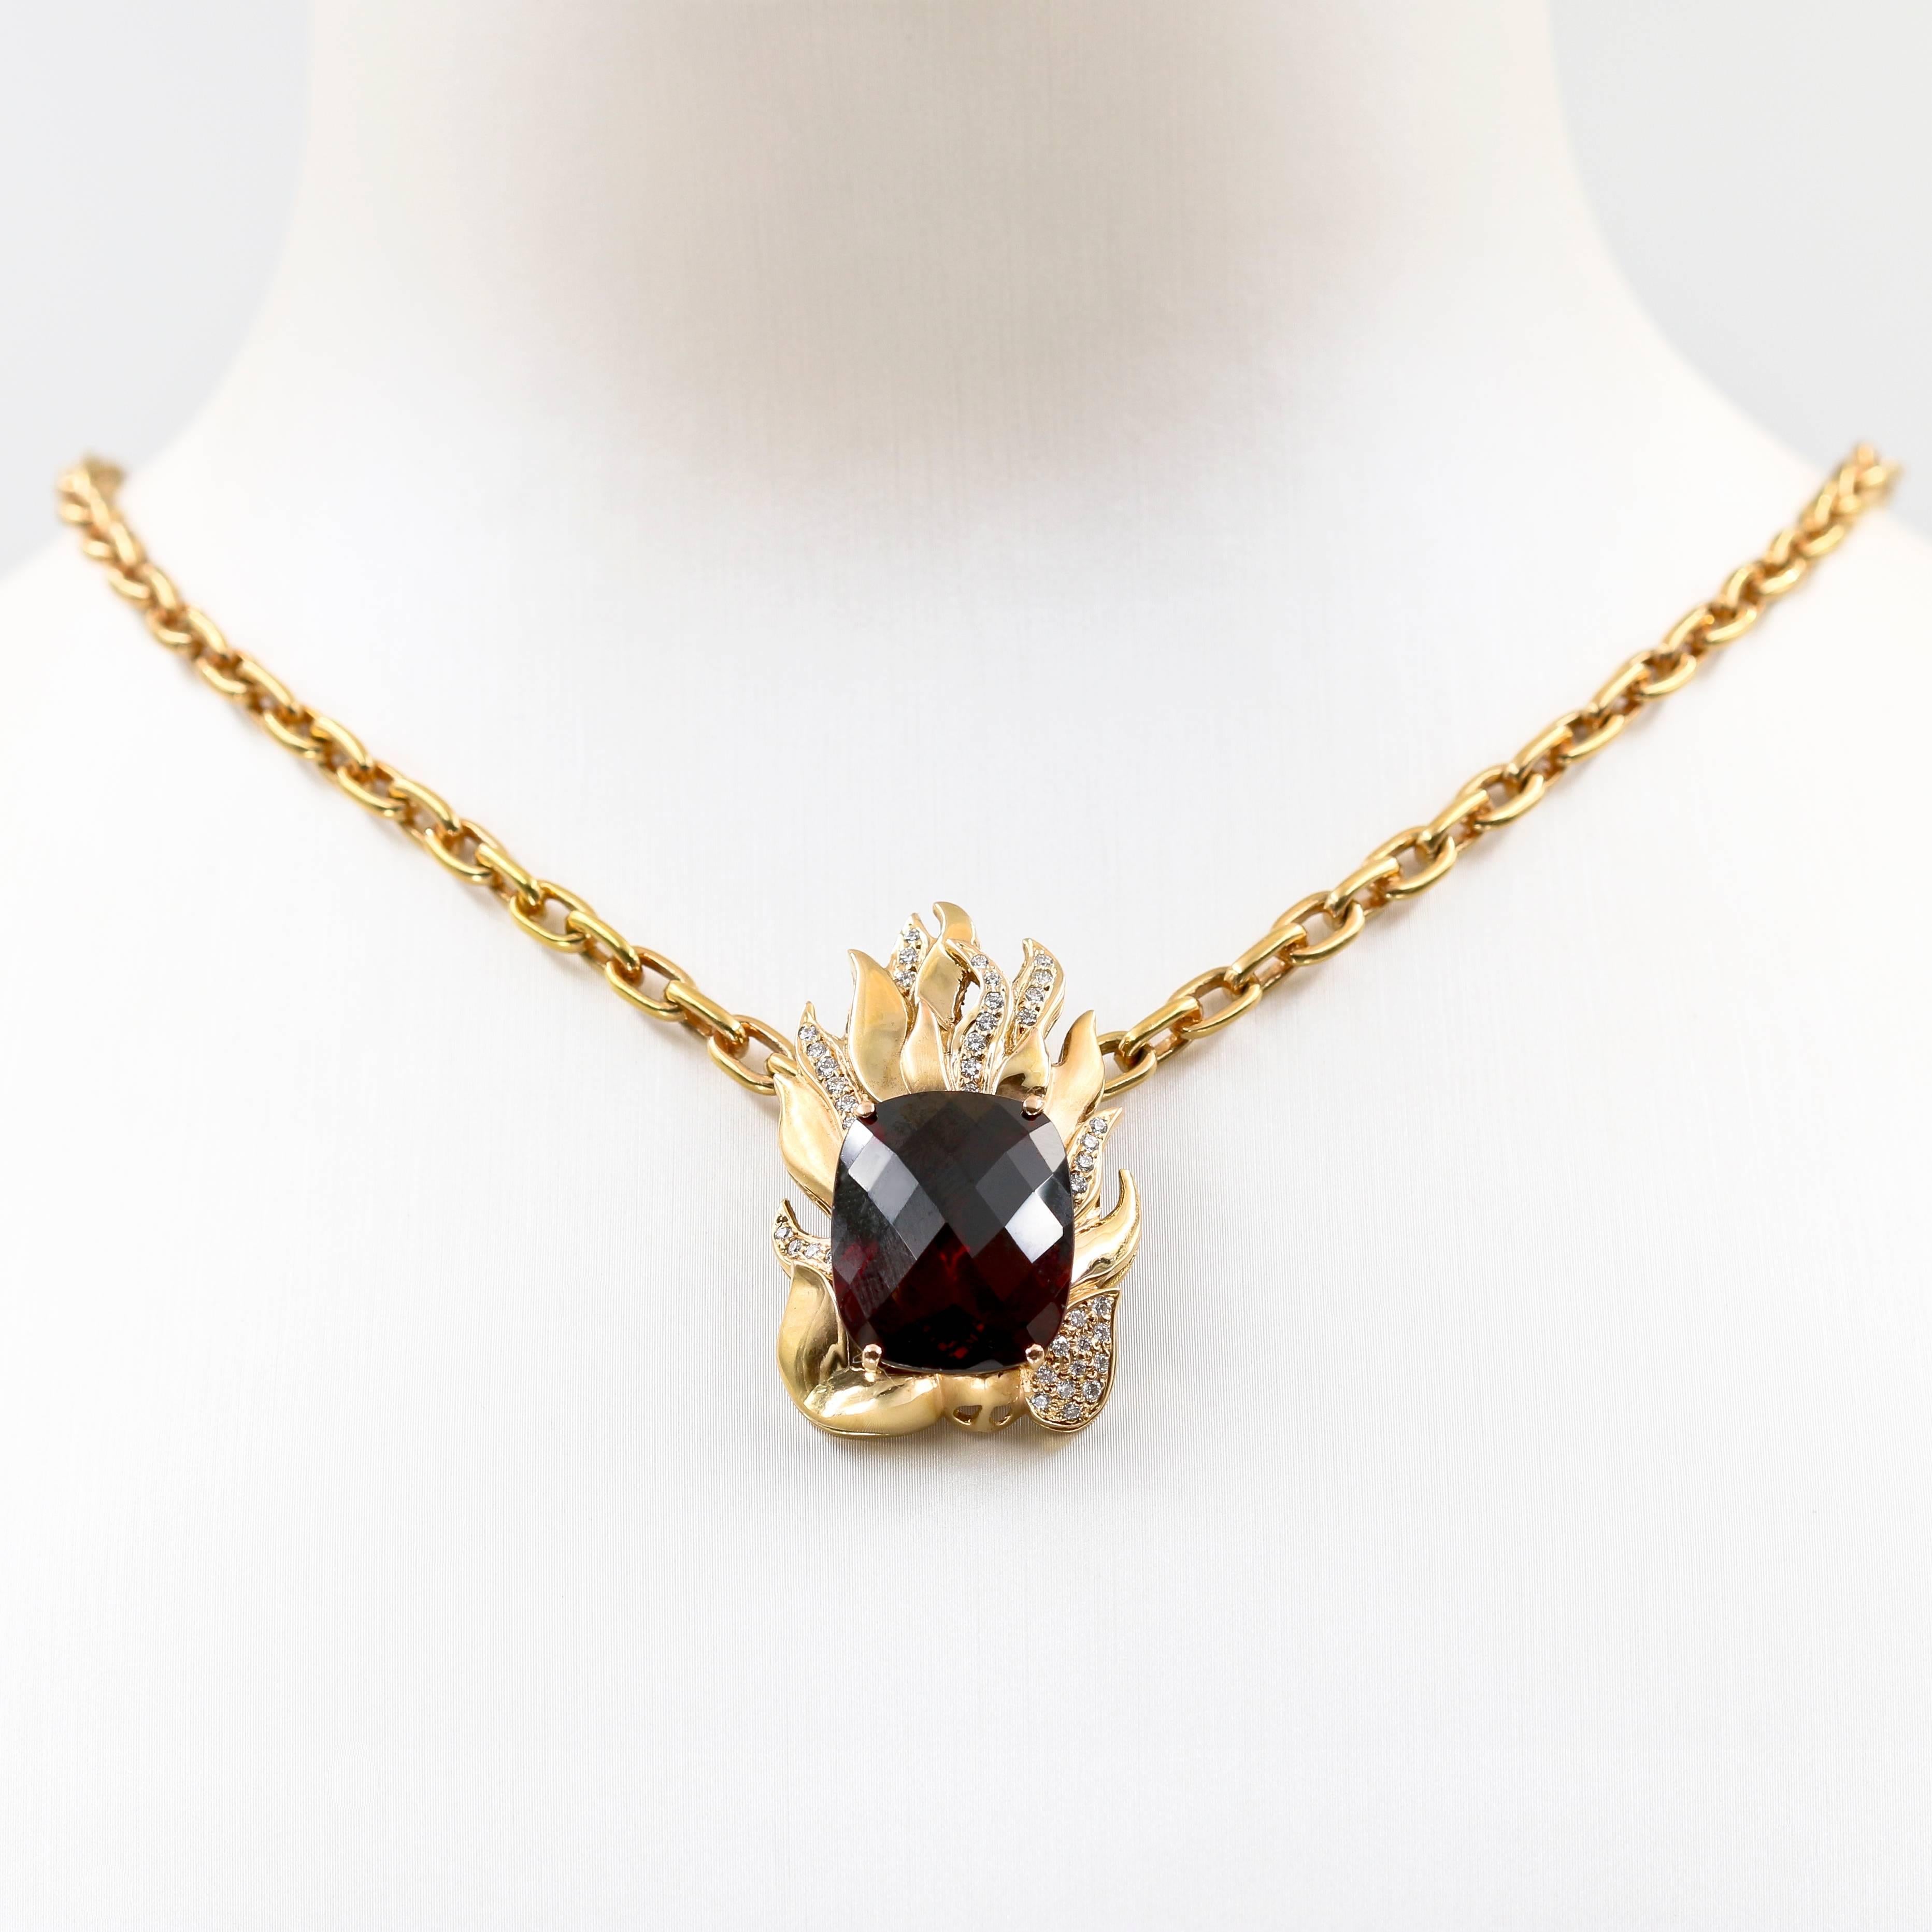 Extraordinary 21.39 Carat Natural Rhodolite and Diamond Necklace For Sale 2